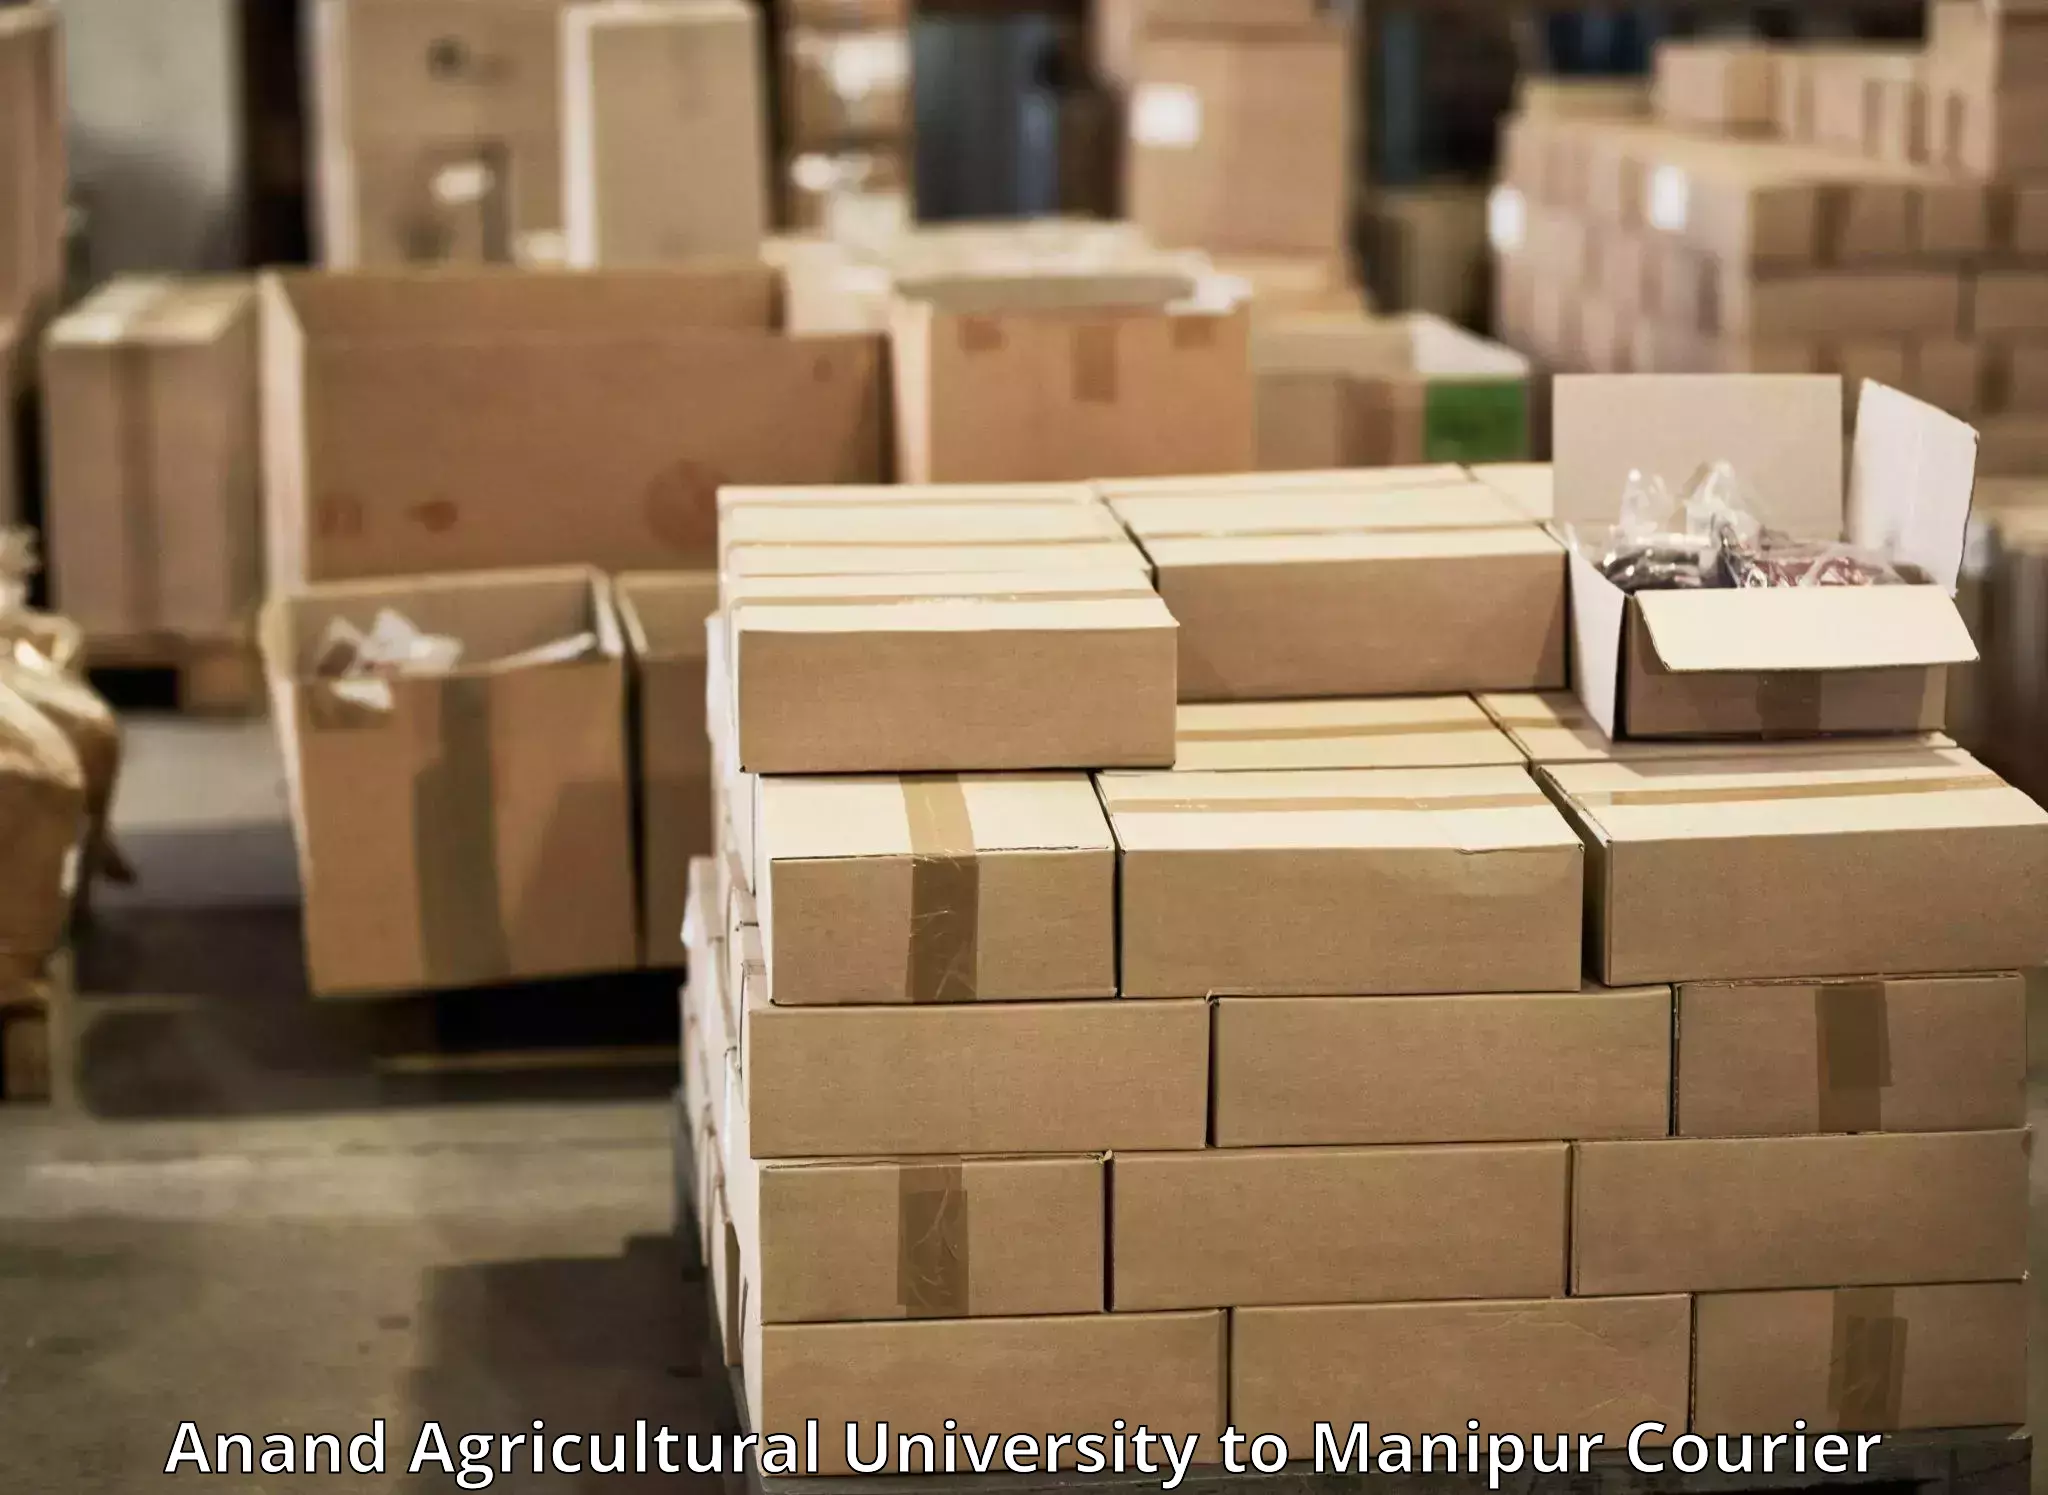 Personal parcel delivery Anand Agricultural University to Chandel